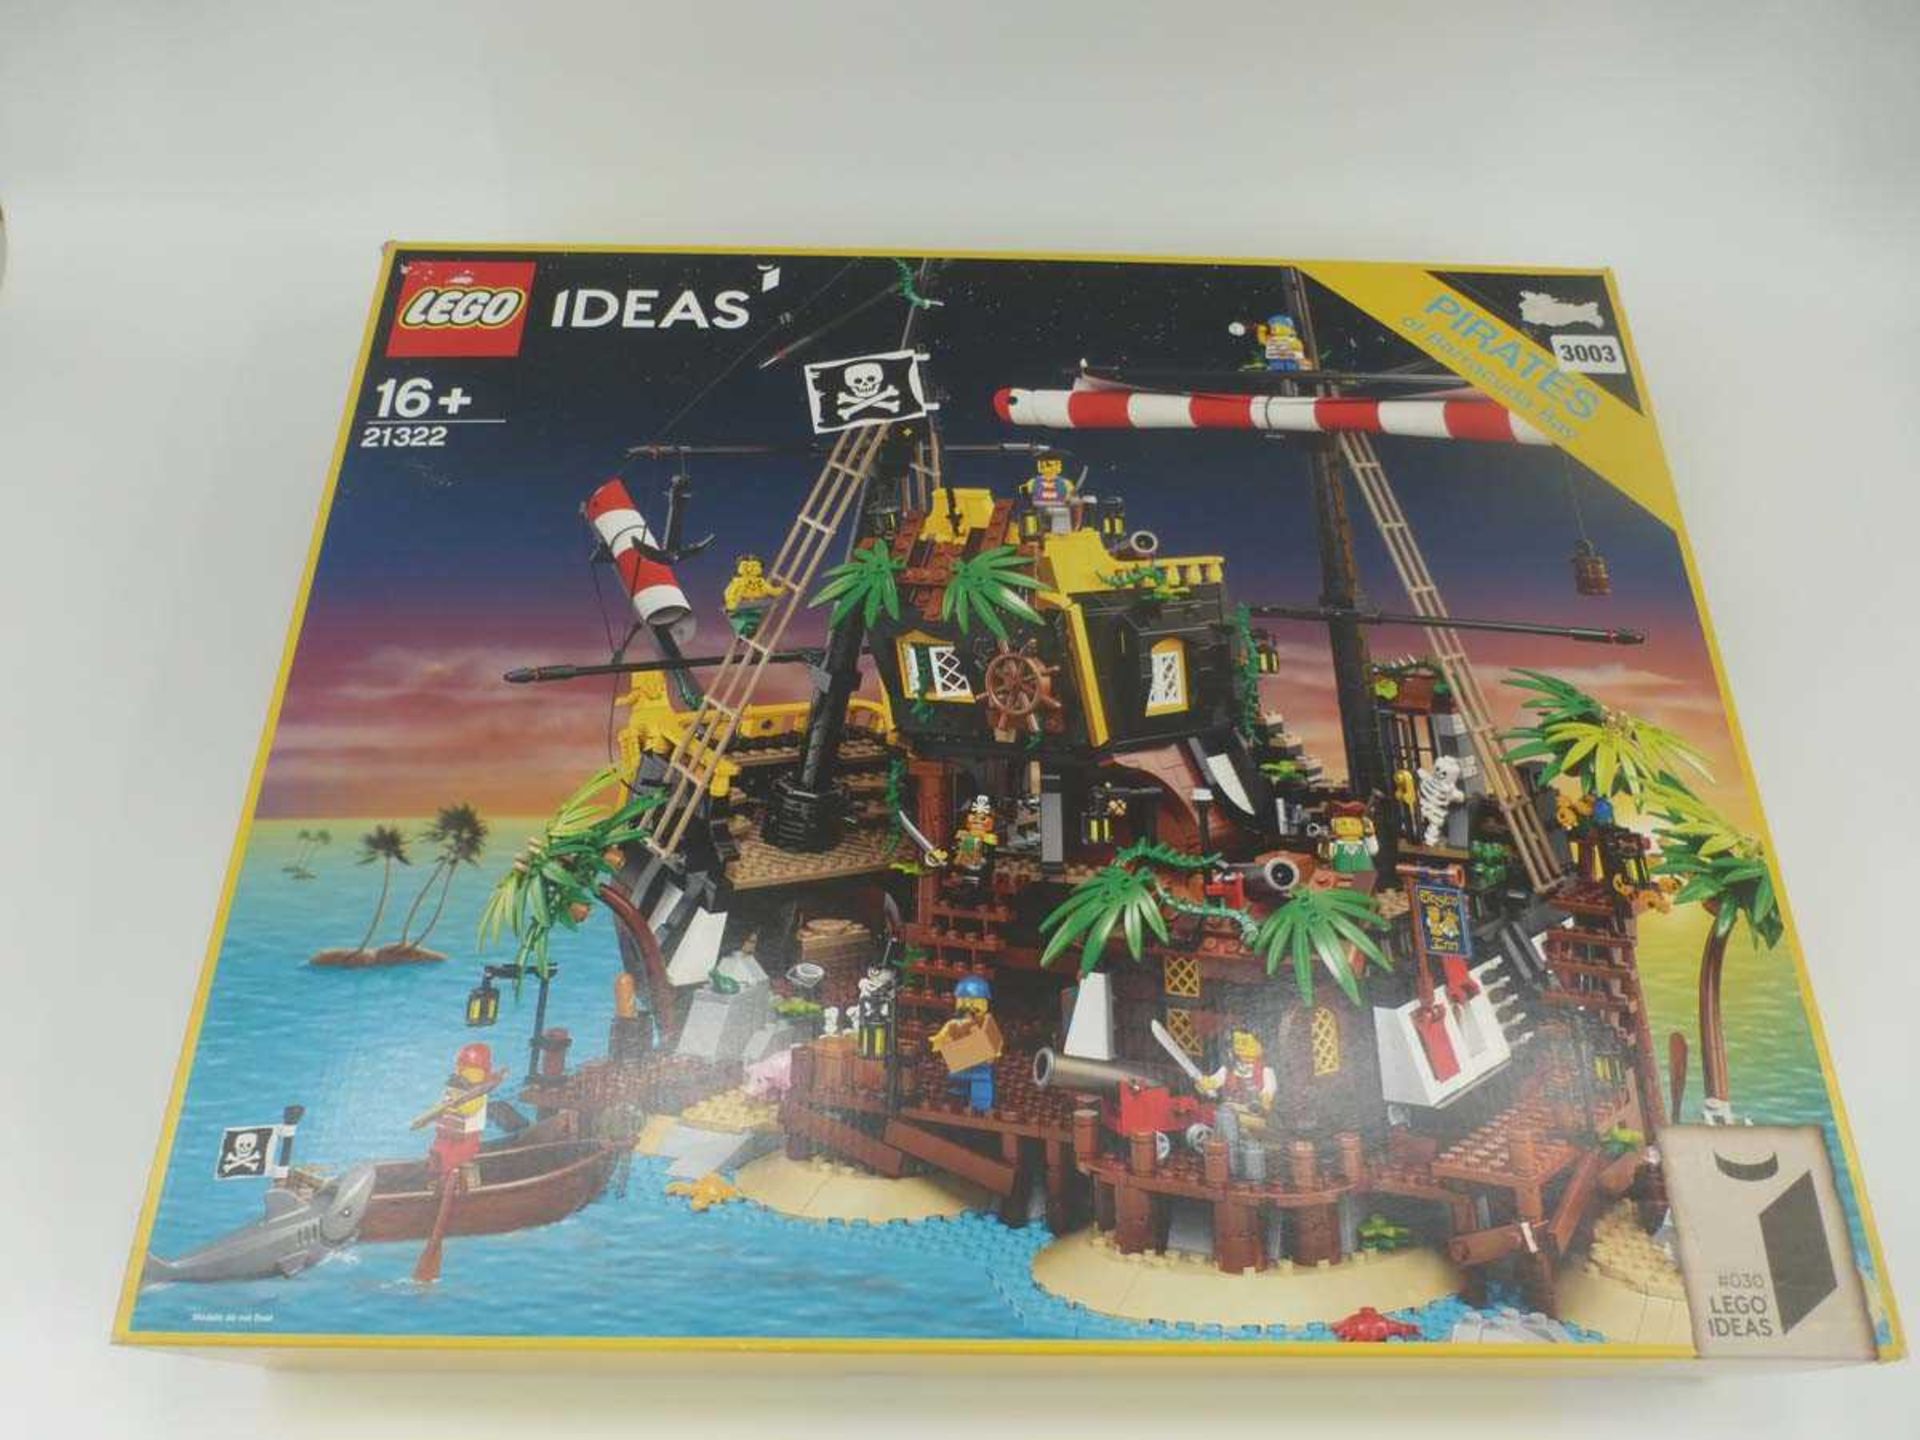 A Lego Ideas 21322 Pirates of Barracuda Bay set, boxedContents unchecked